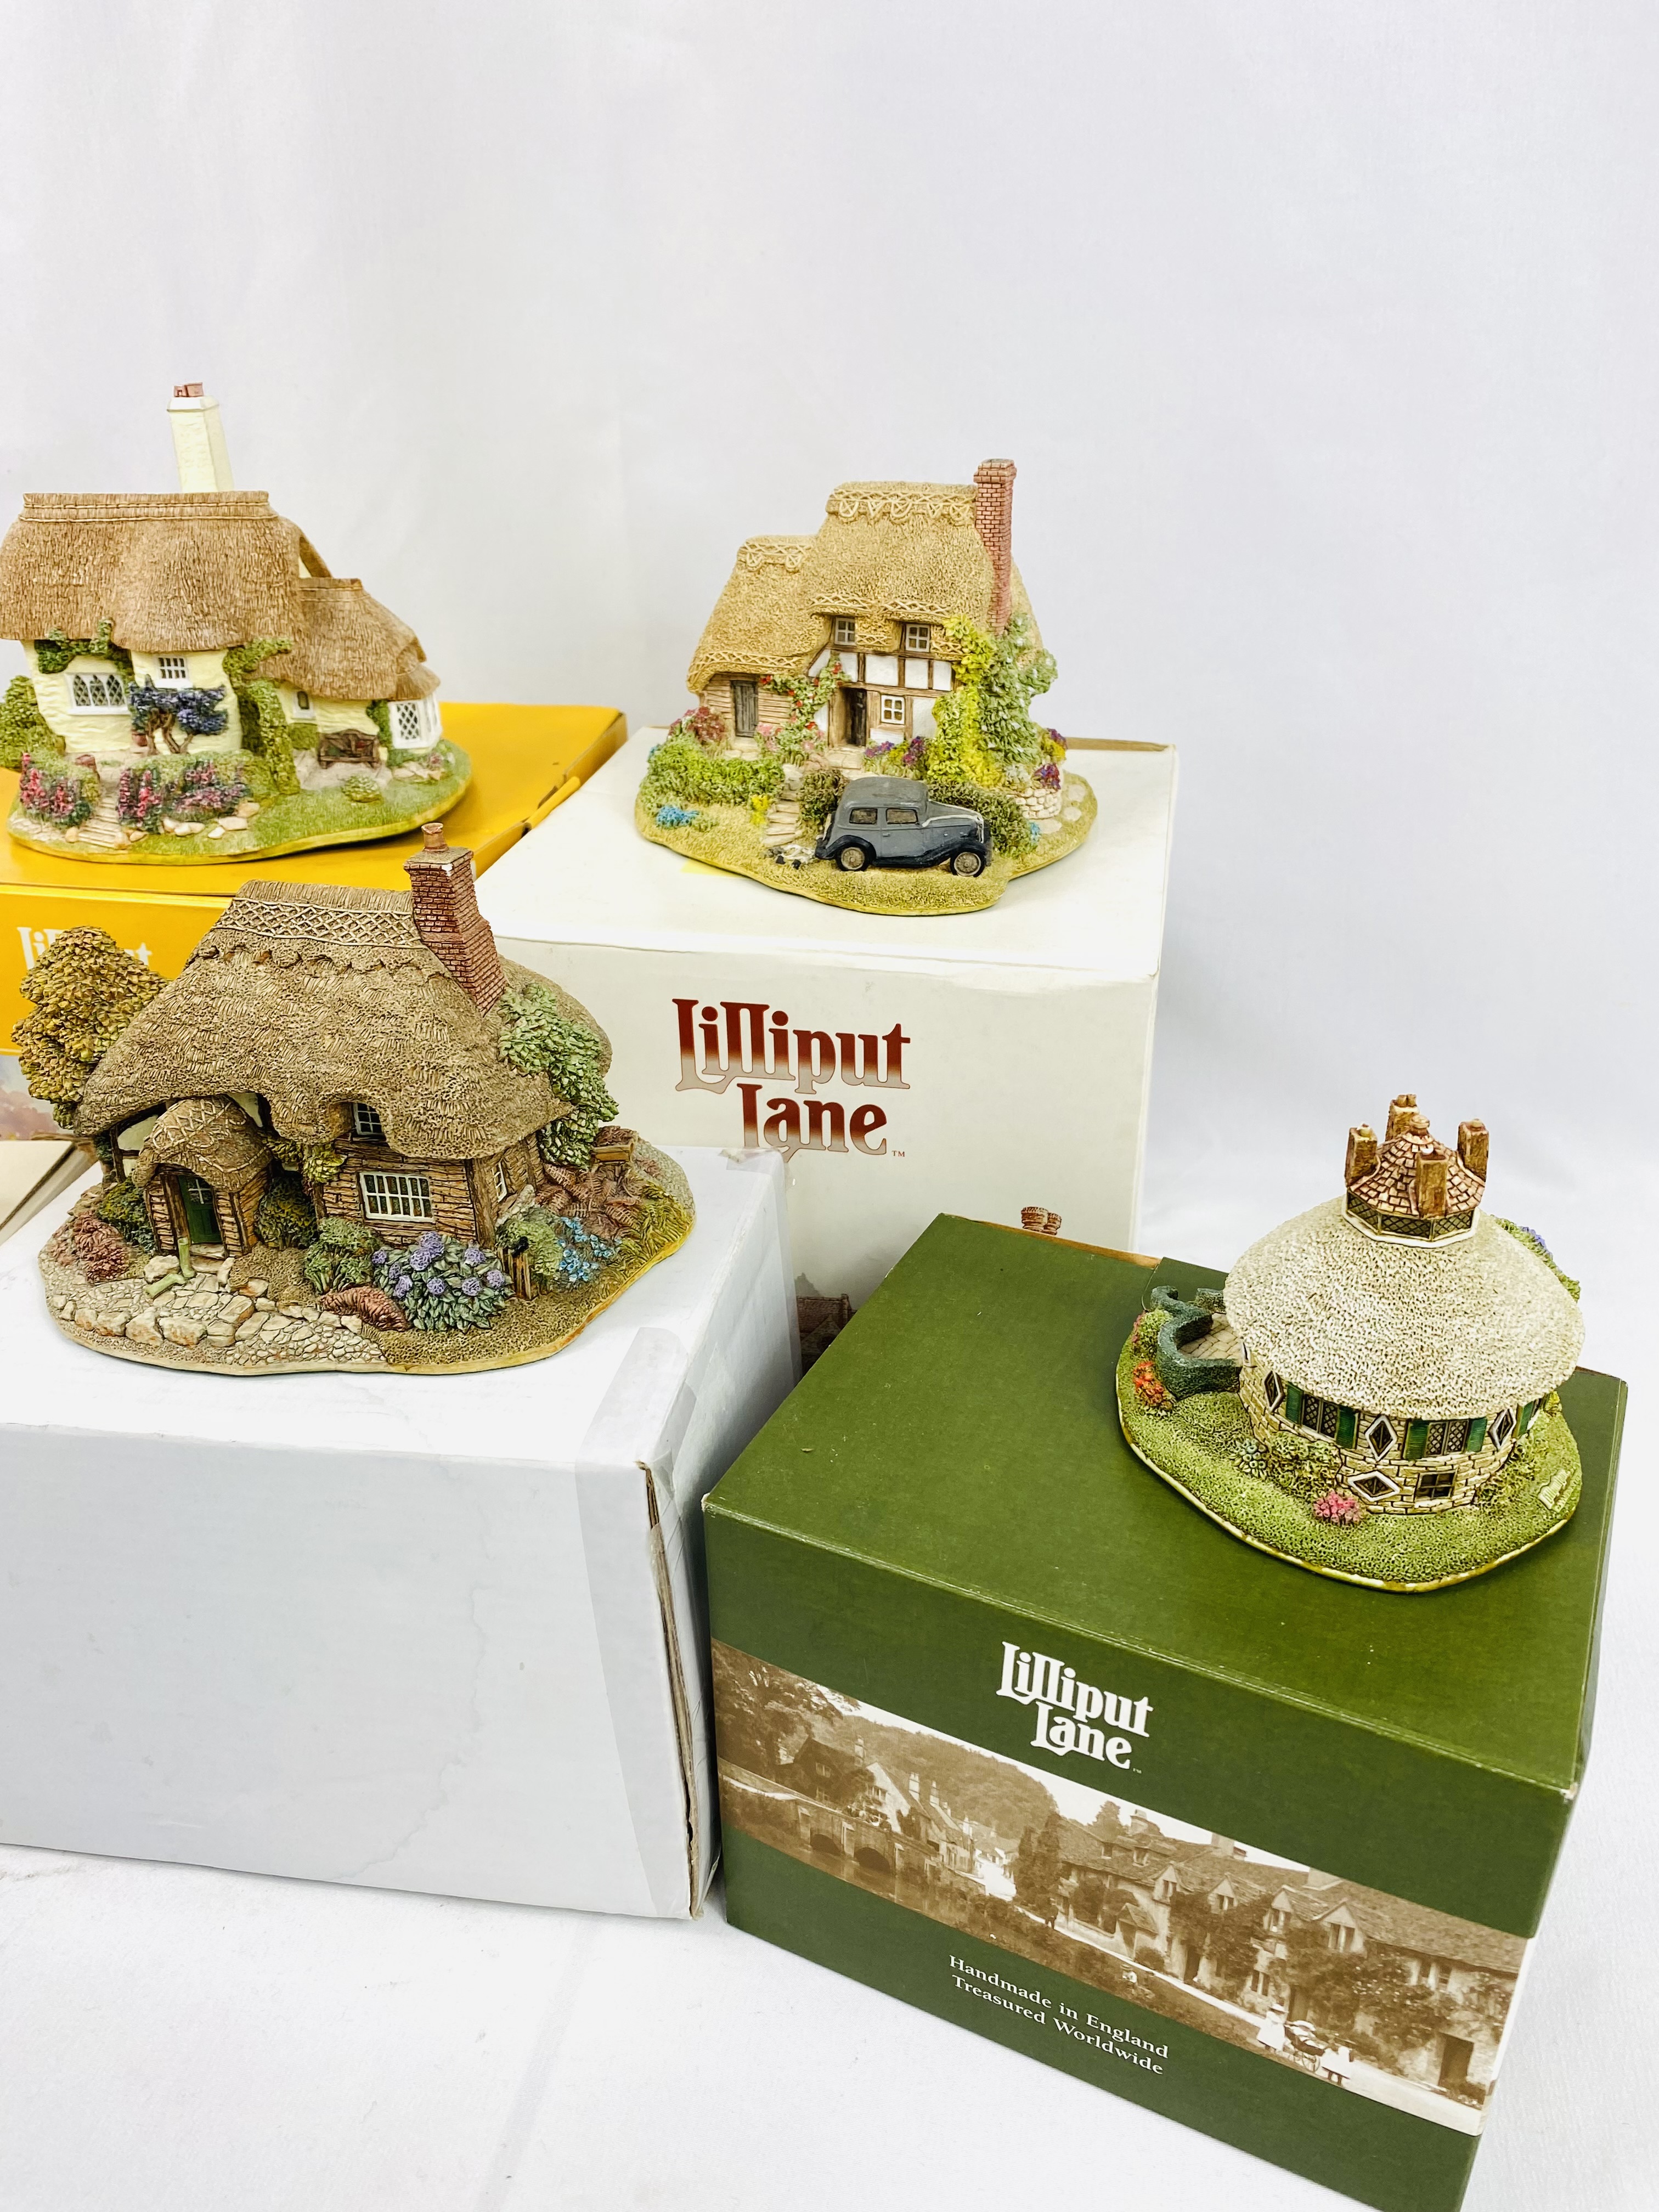 Five Lilliput Lane Cottages in boxes - Image 3 of 4